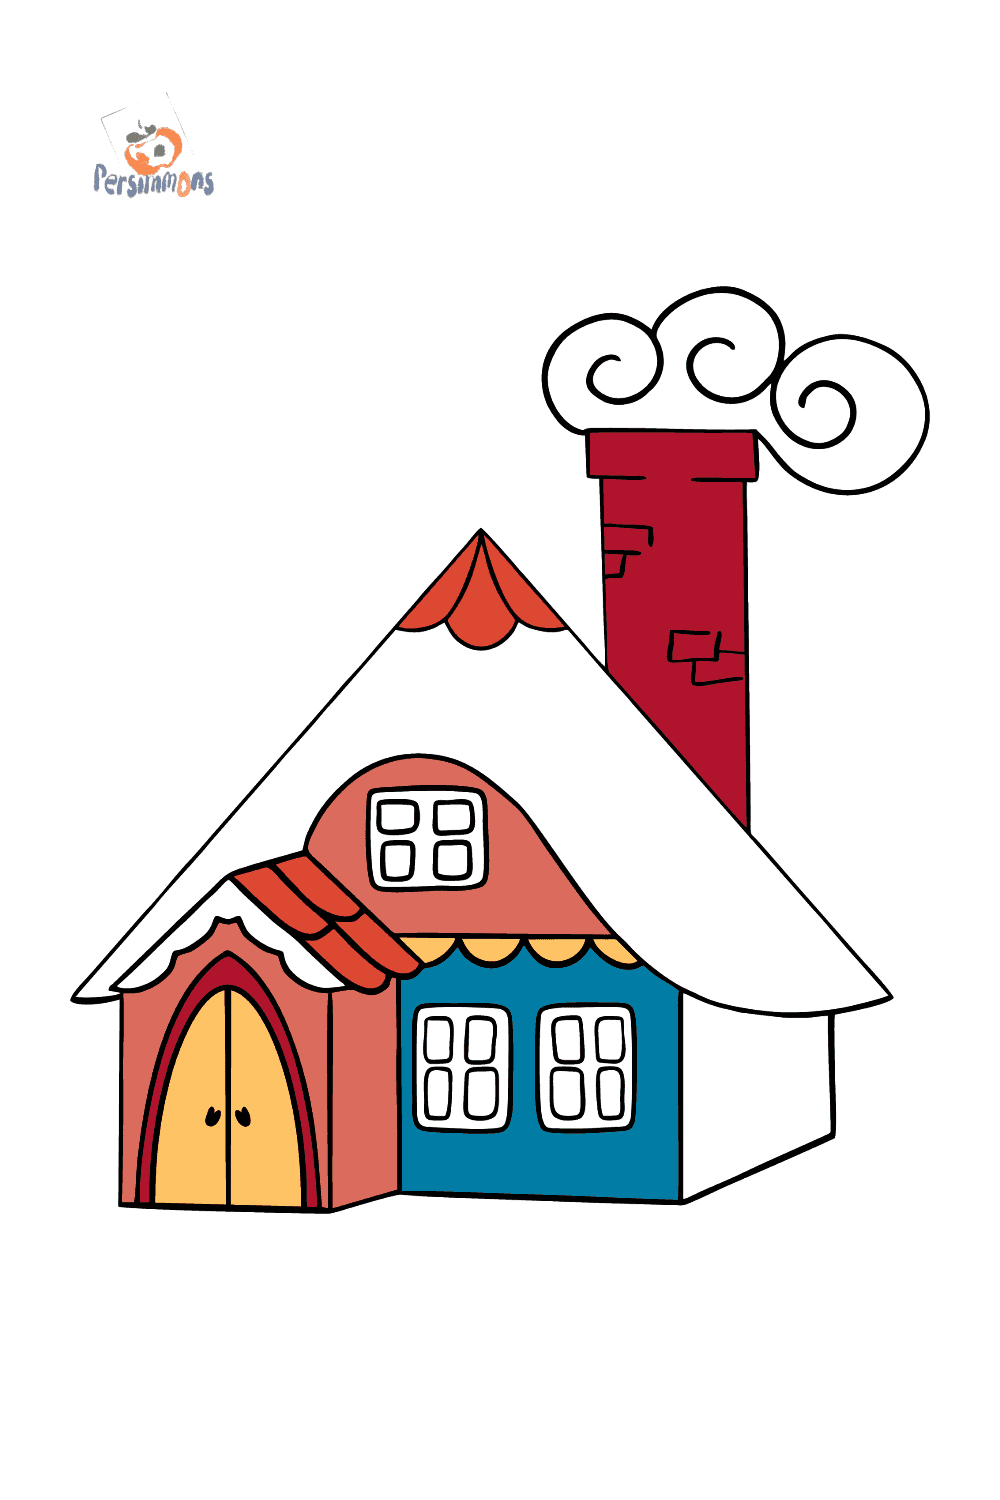 Wonderful house coloring page â online and print for free